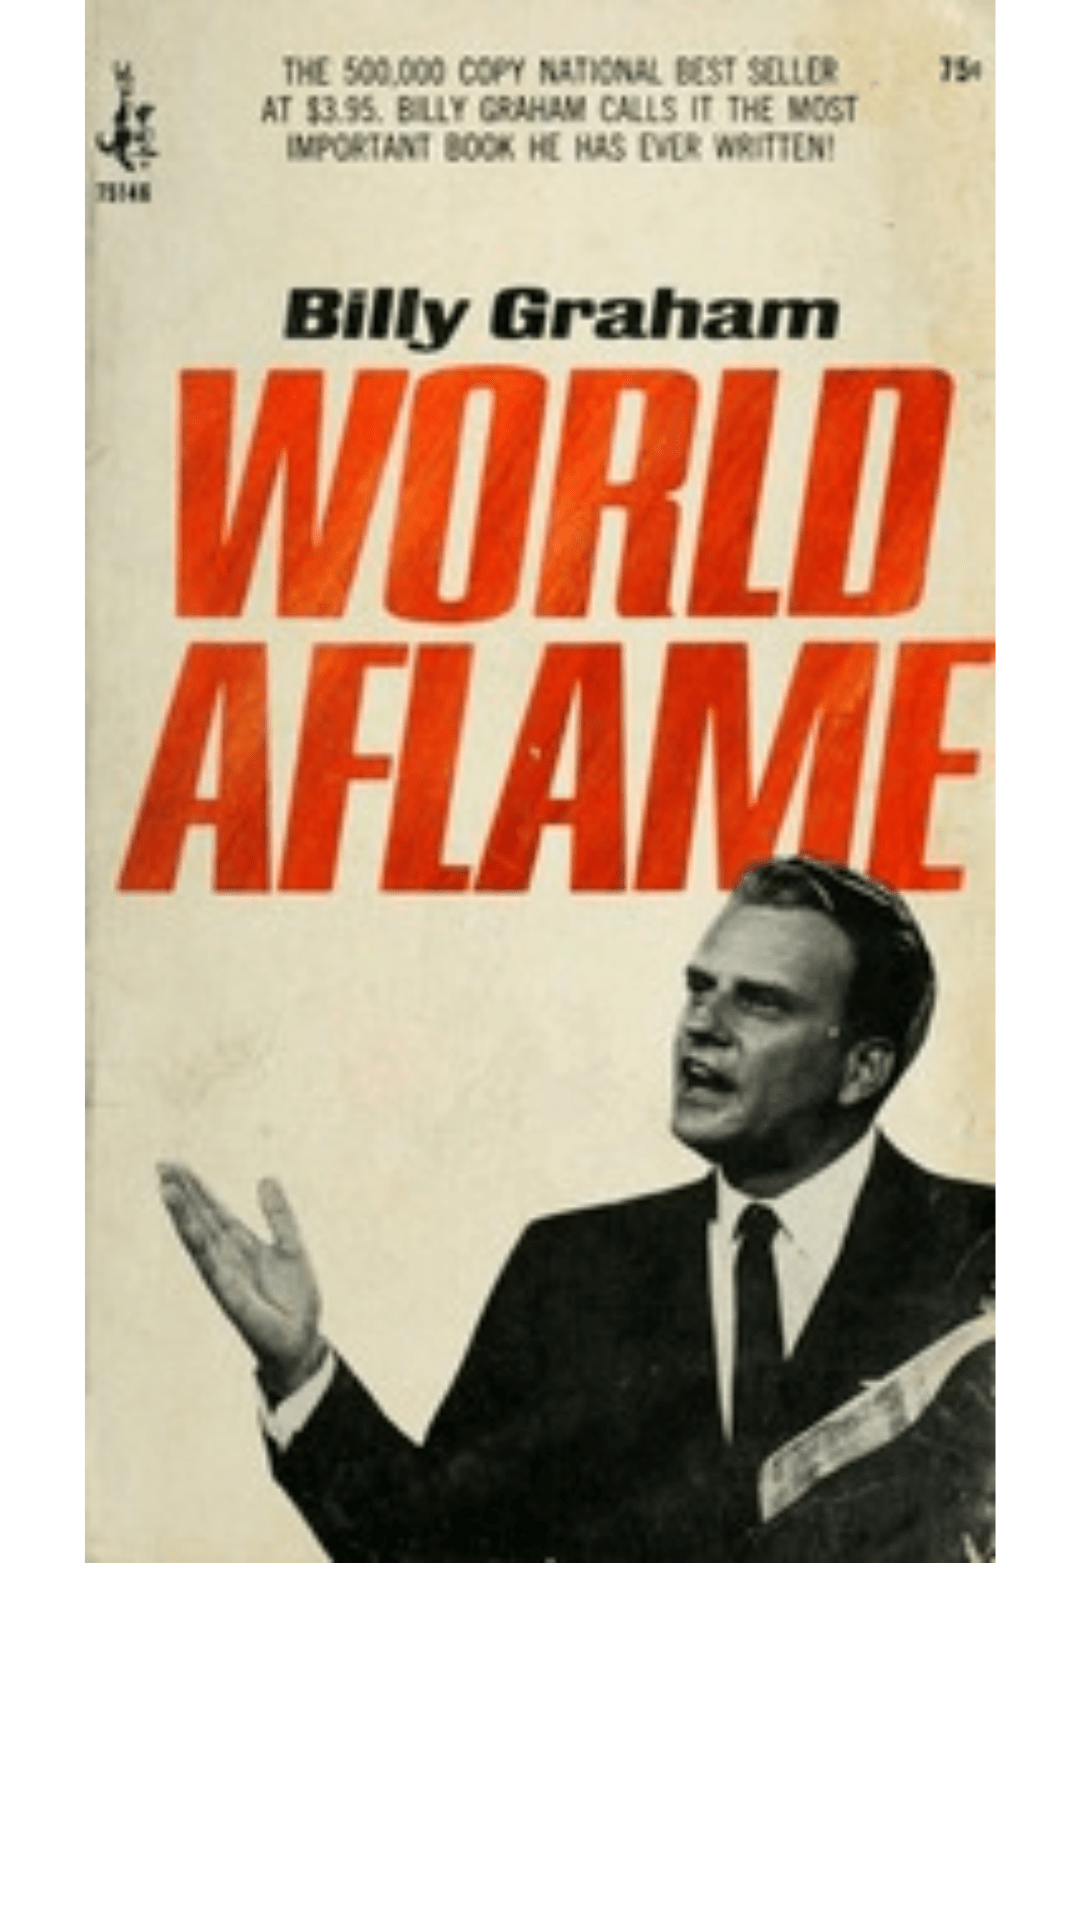 World Aflame by Billy Graham